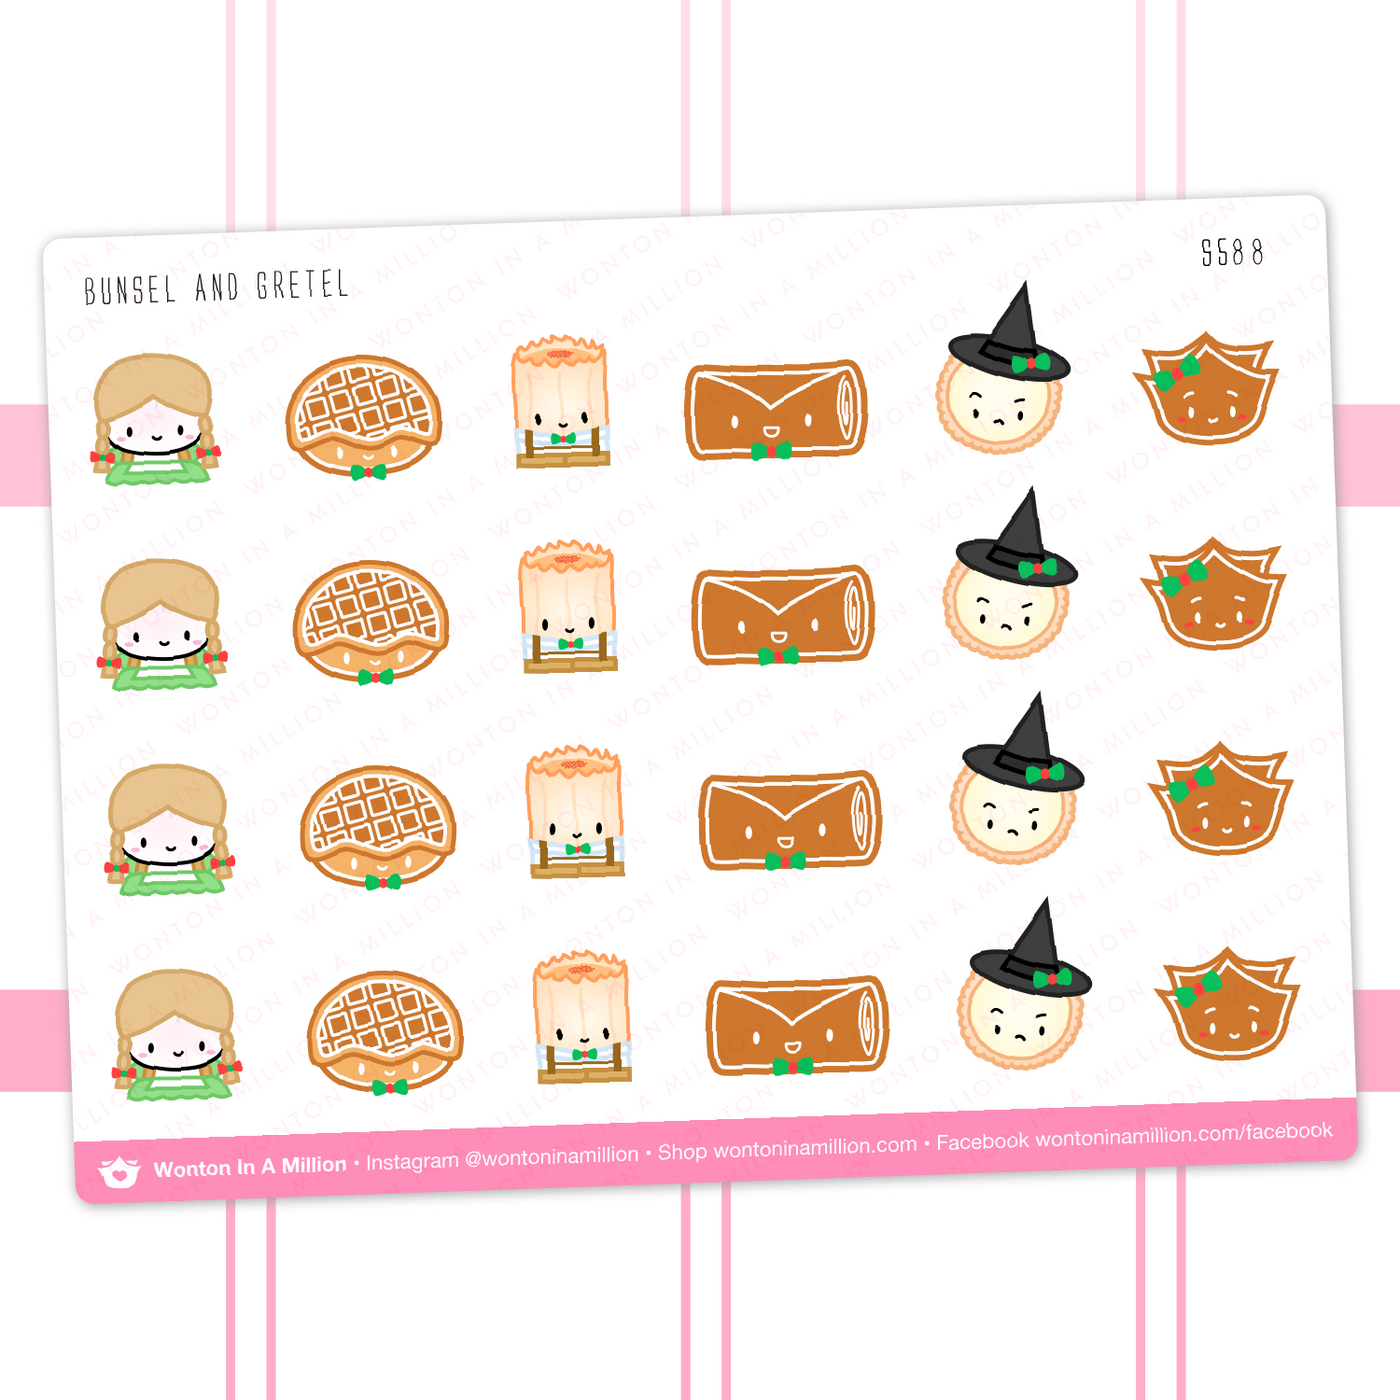 Bunsel and Gretel Stickers